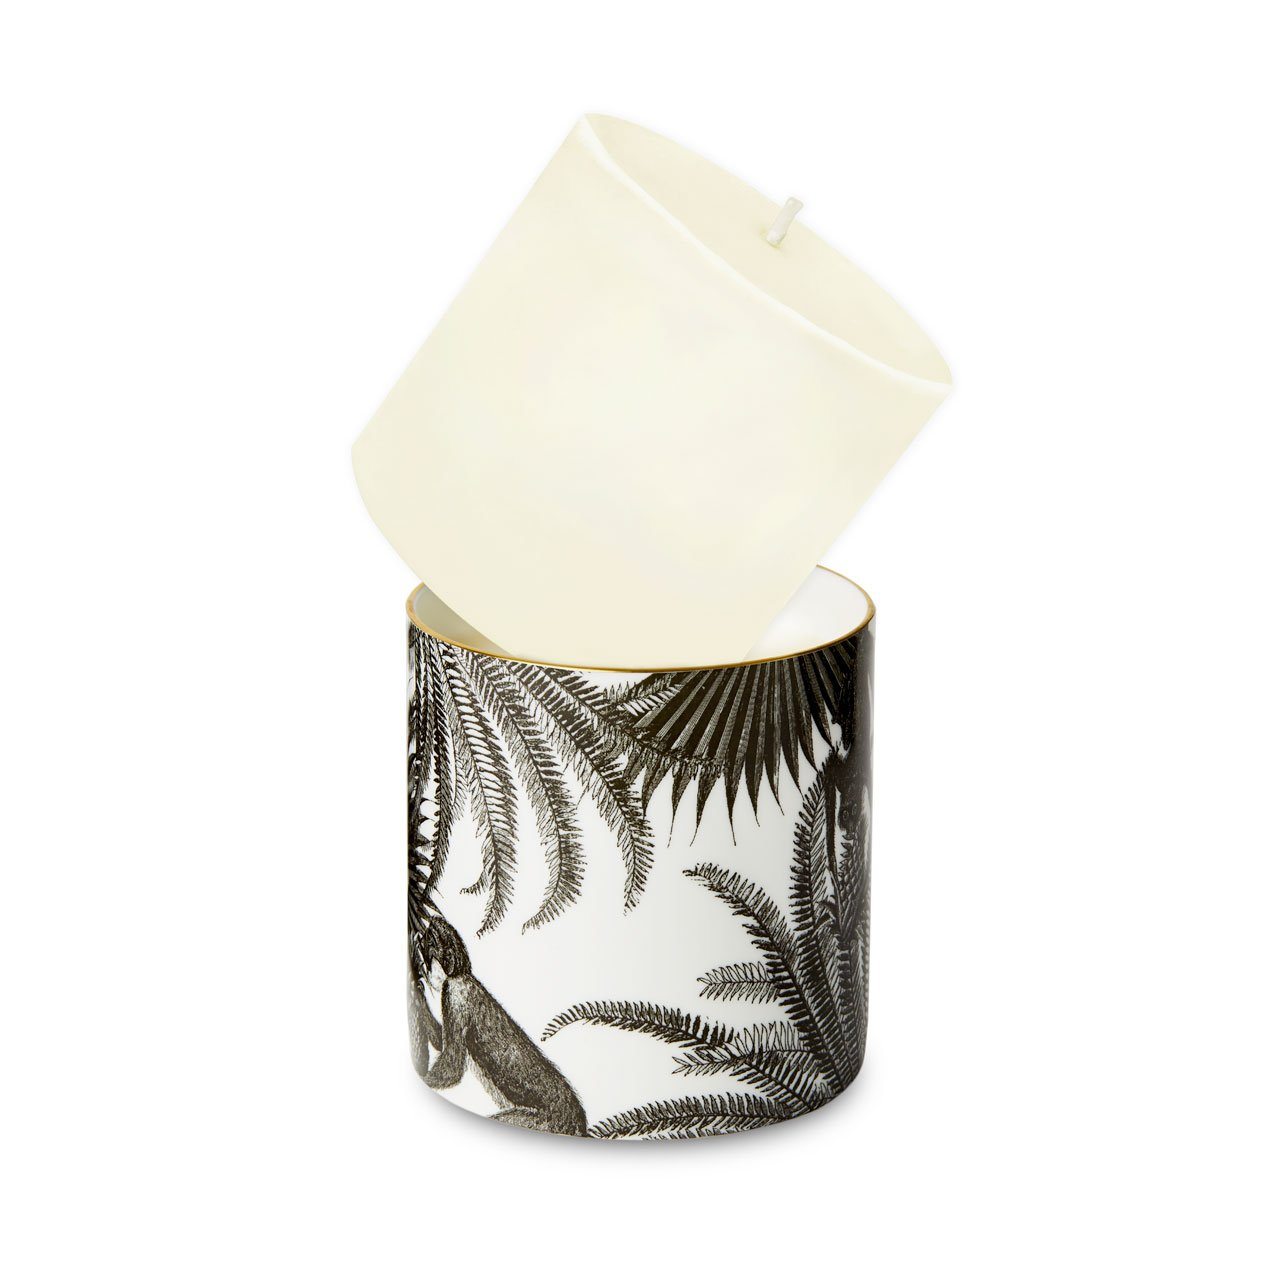 Refill for The Tropical Paradise Ceramic Candle